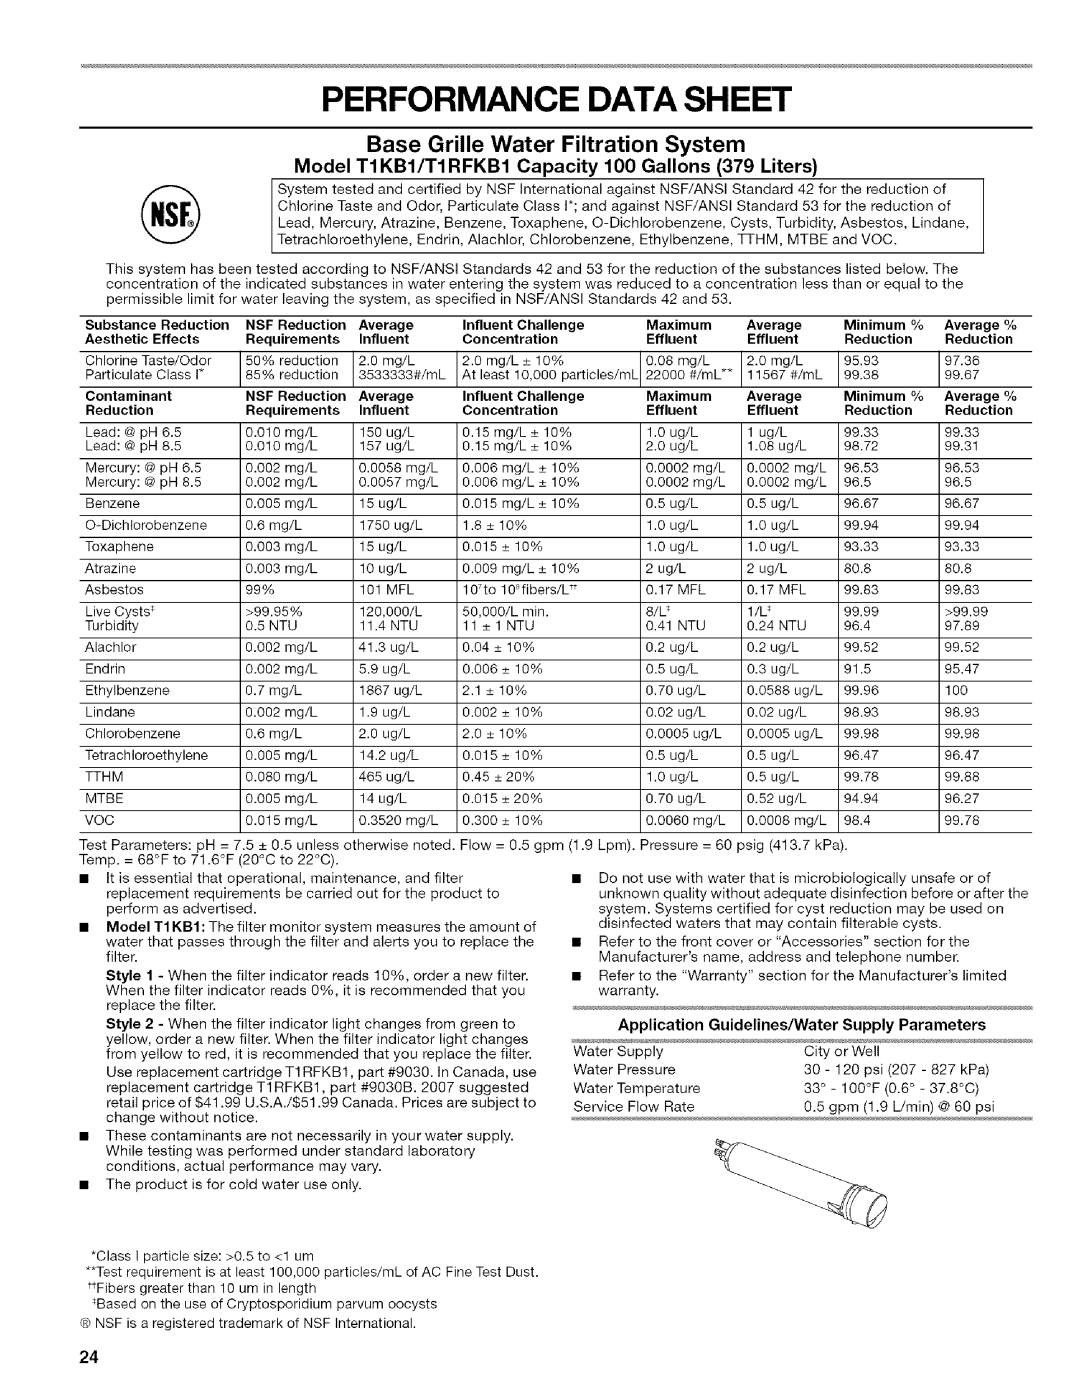 Kenmore WI0151336A manual Performance Data Sheet, Base Grille Water Filtration System 